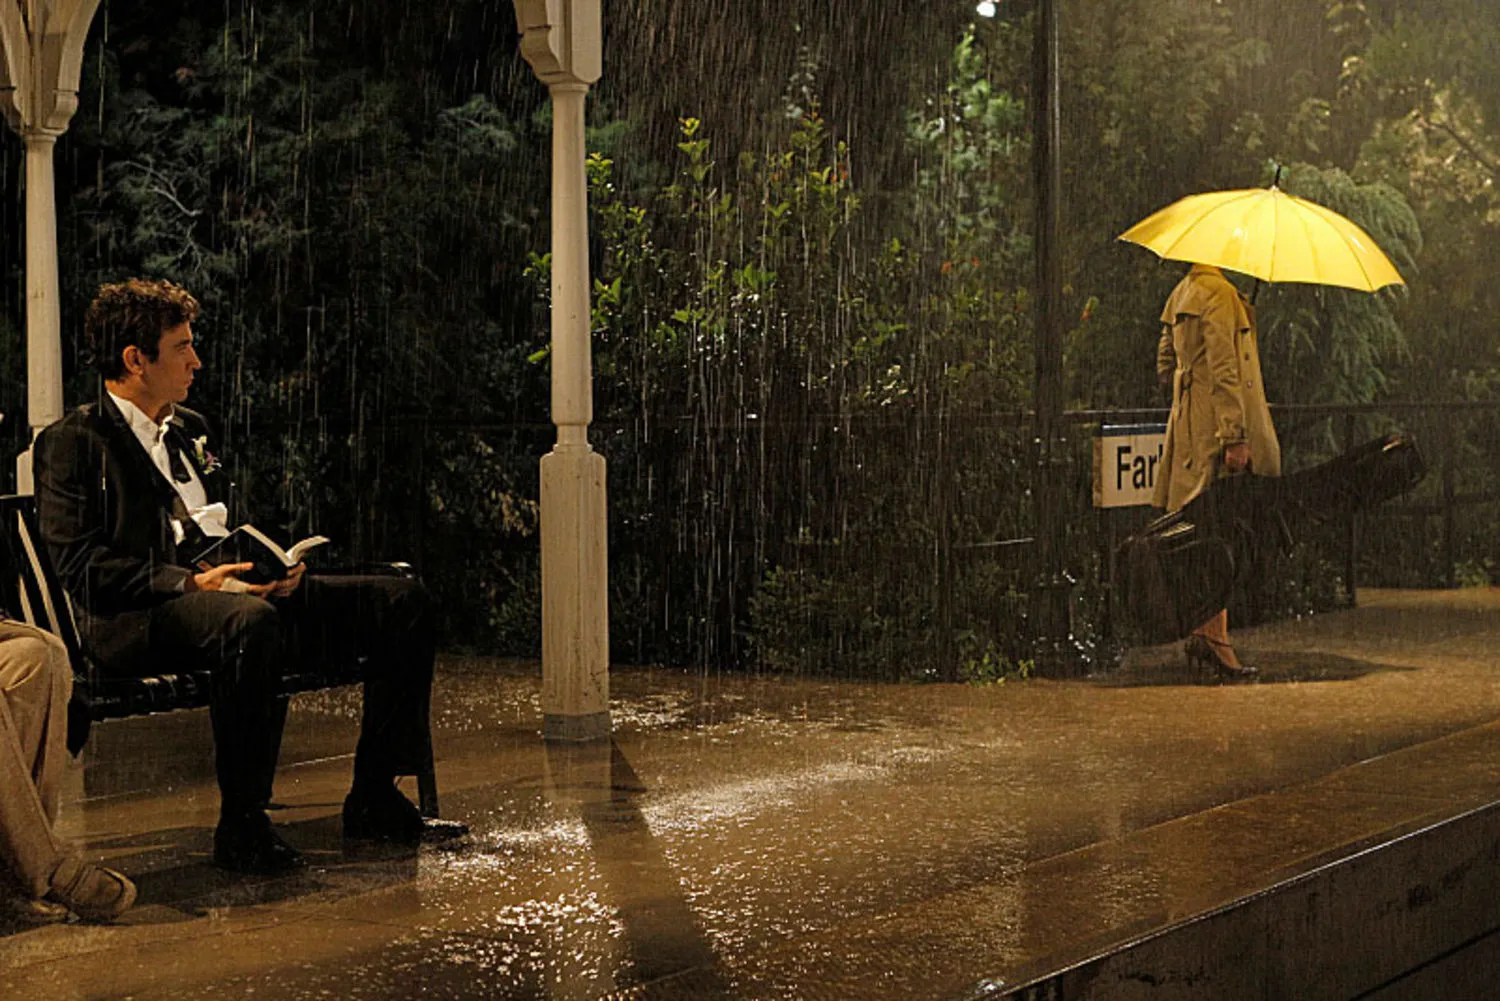 How I Met Your Mother: Ted's "45 Days" Speech-Romantic & Hot Hollywood Scenes